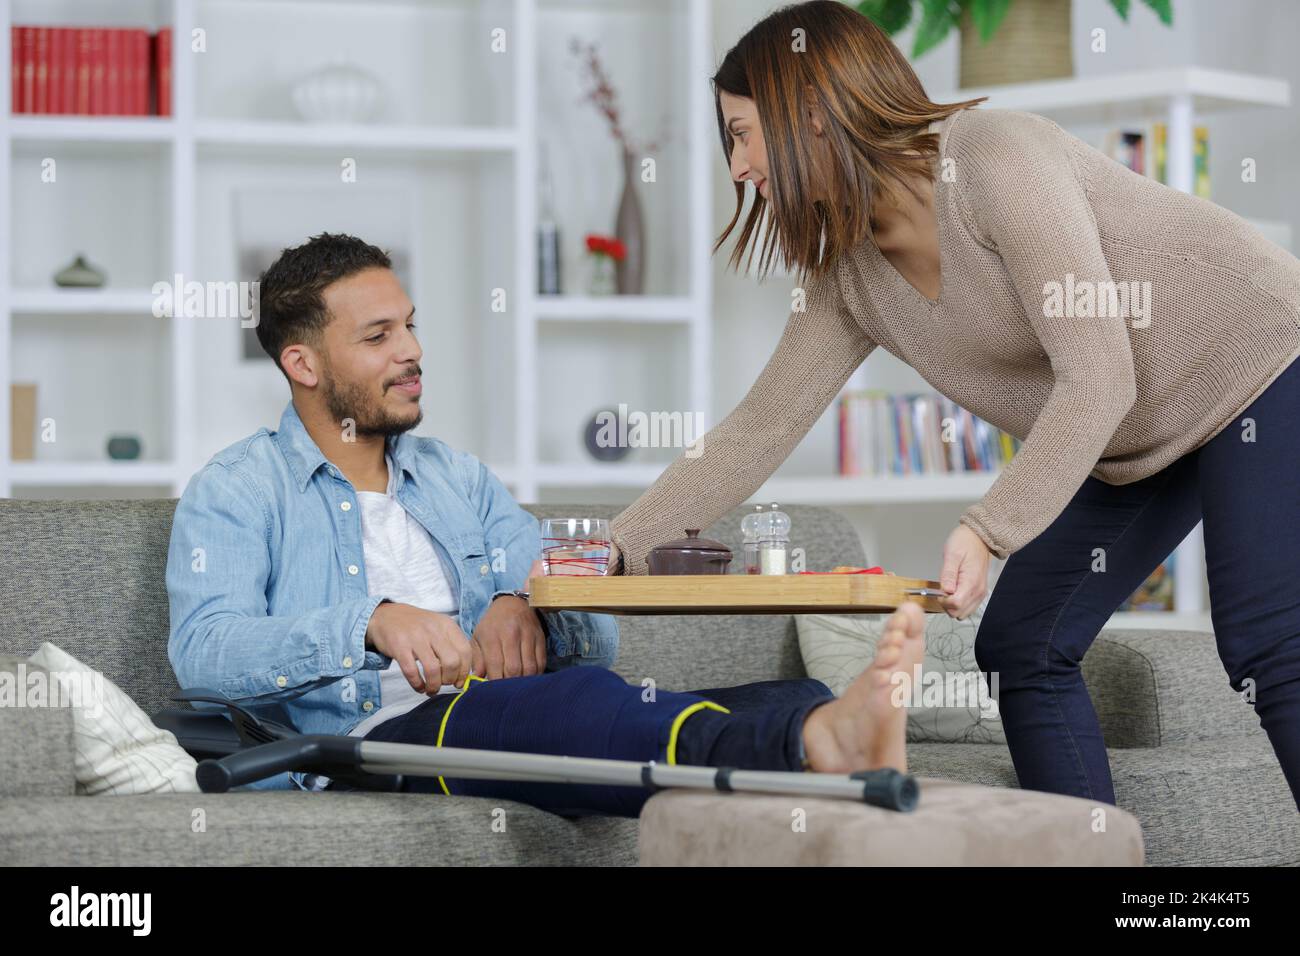 woman serving snack to injured man Stock Photo